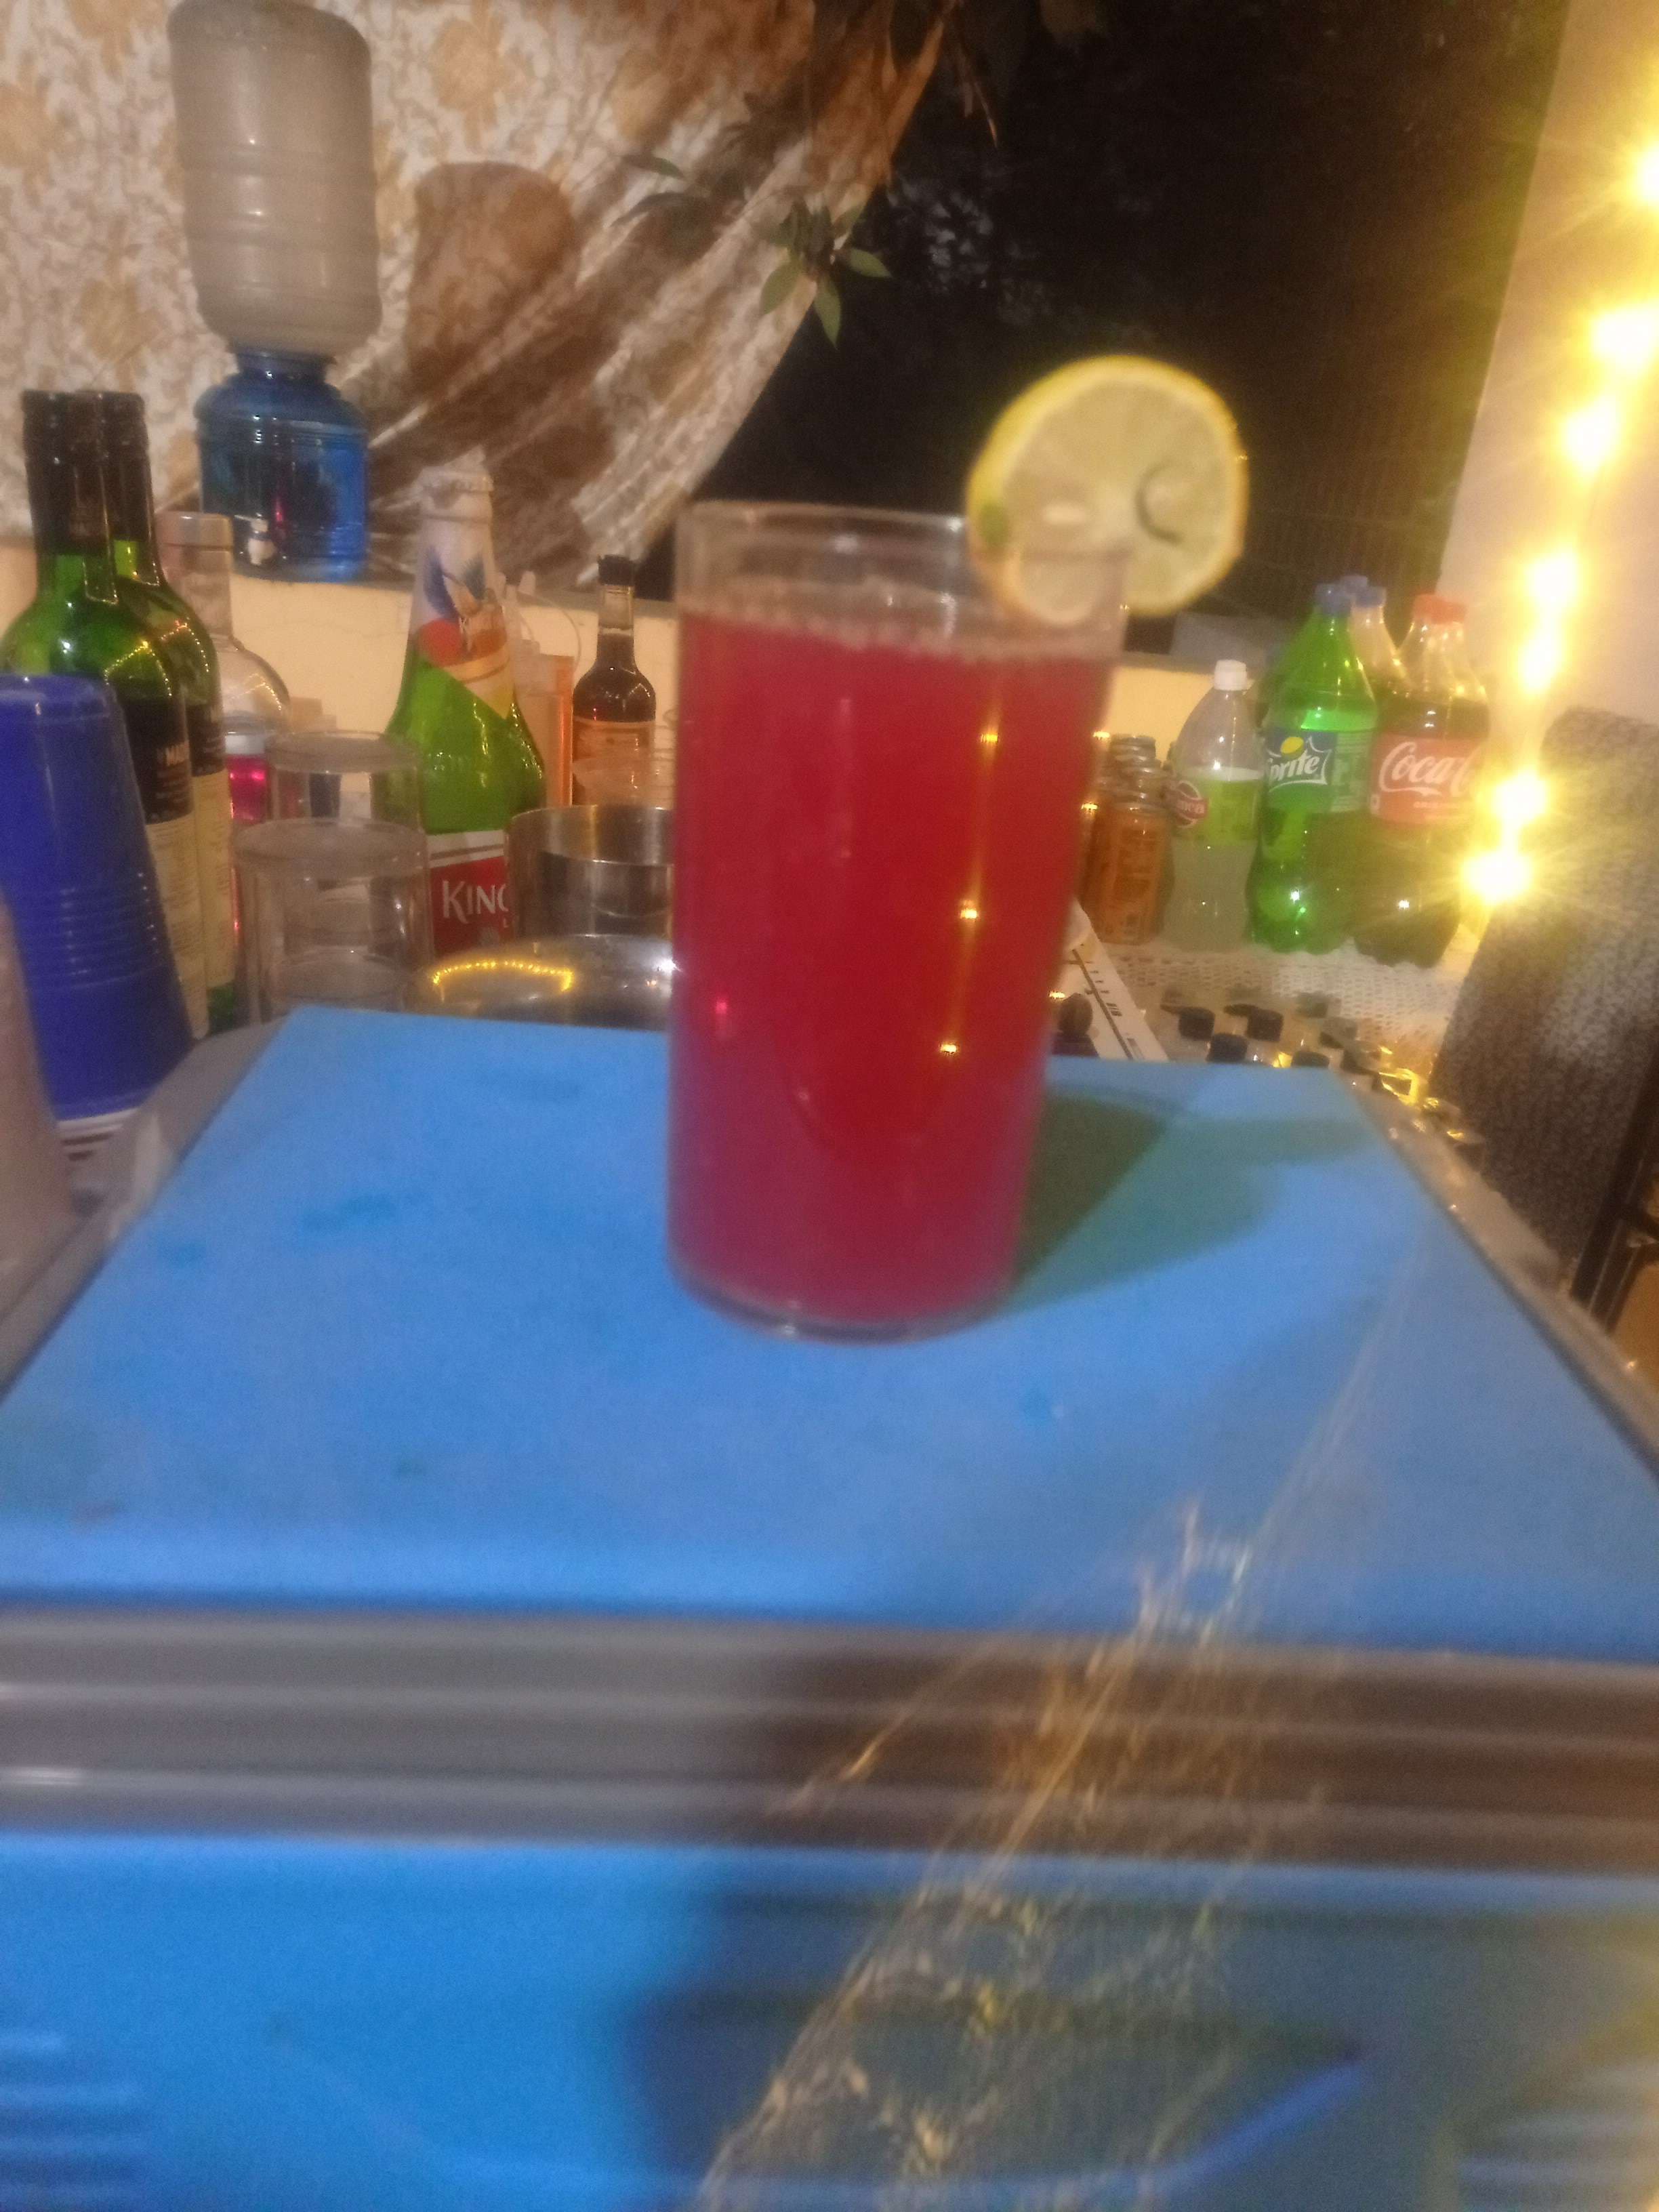 Tasty Fruit Punch cooked by COOX chefs cooks during occasions parties events at home